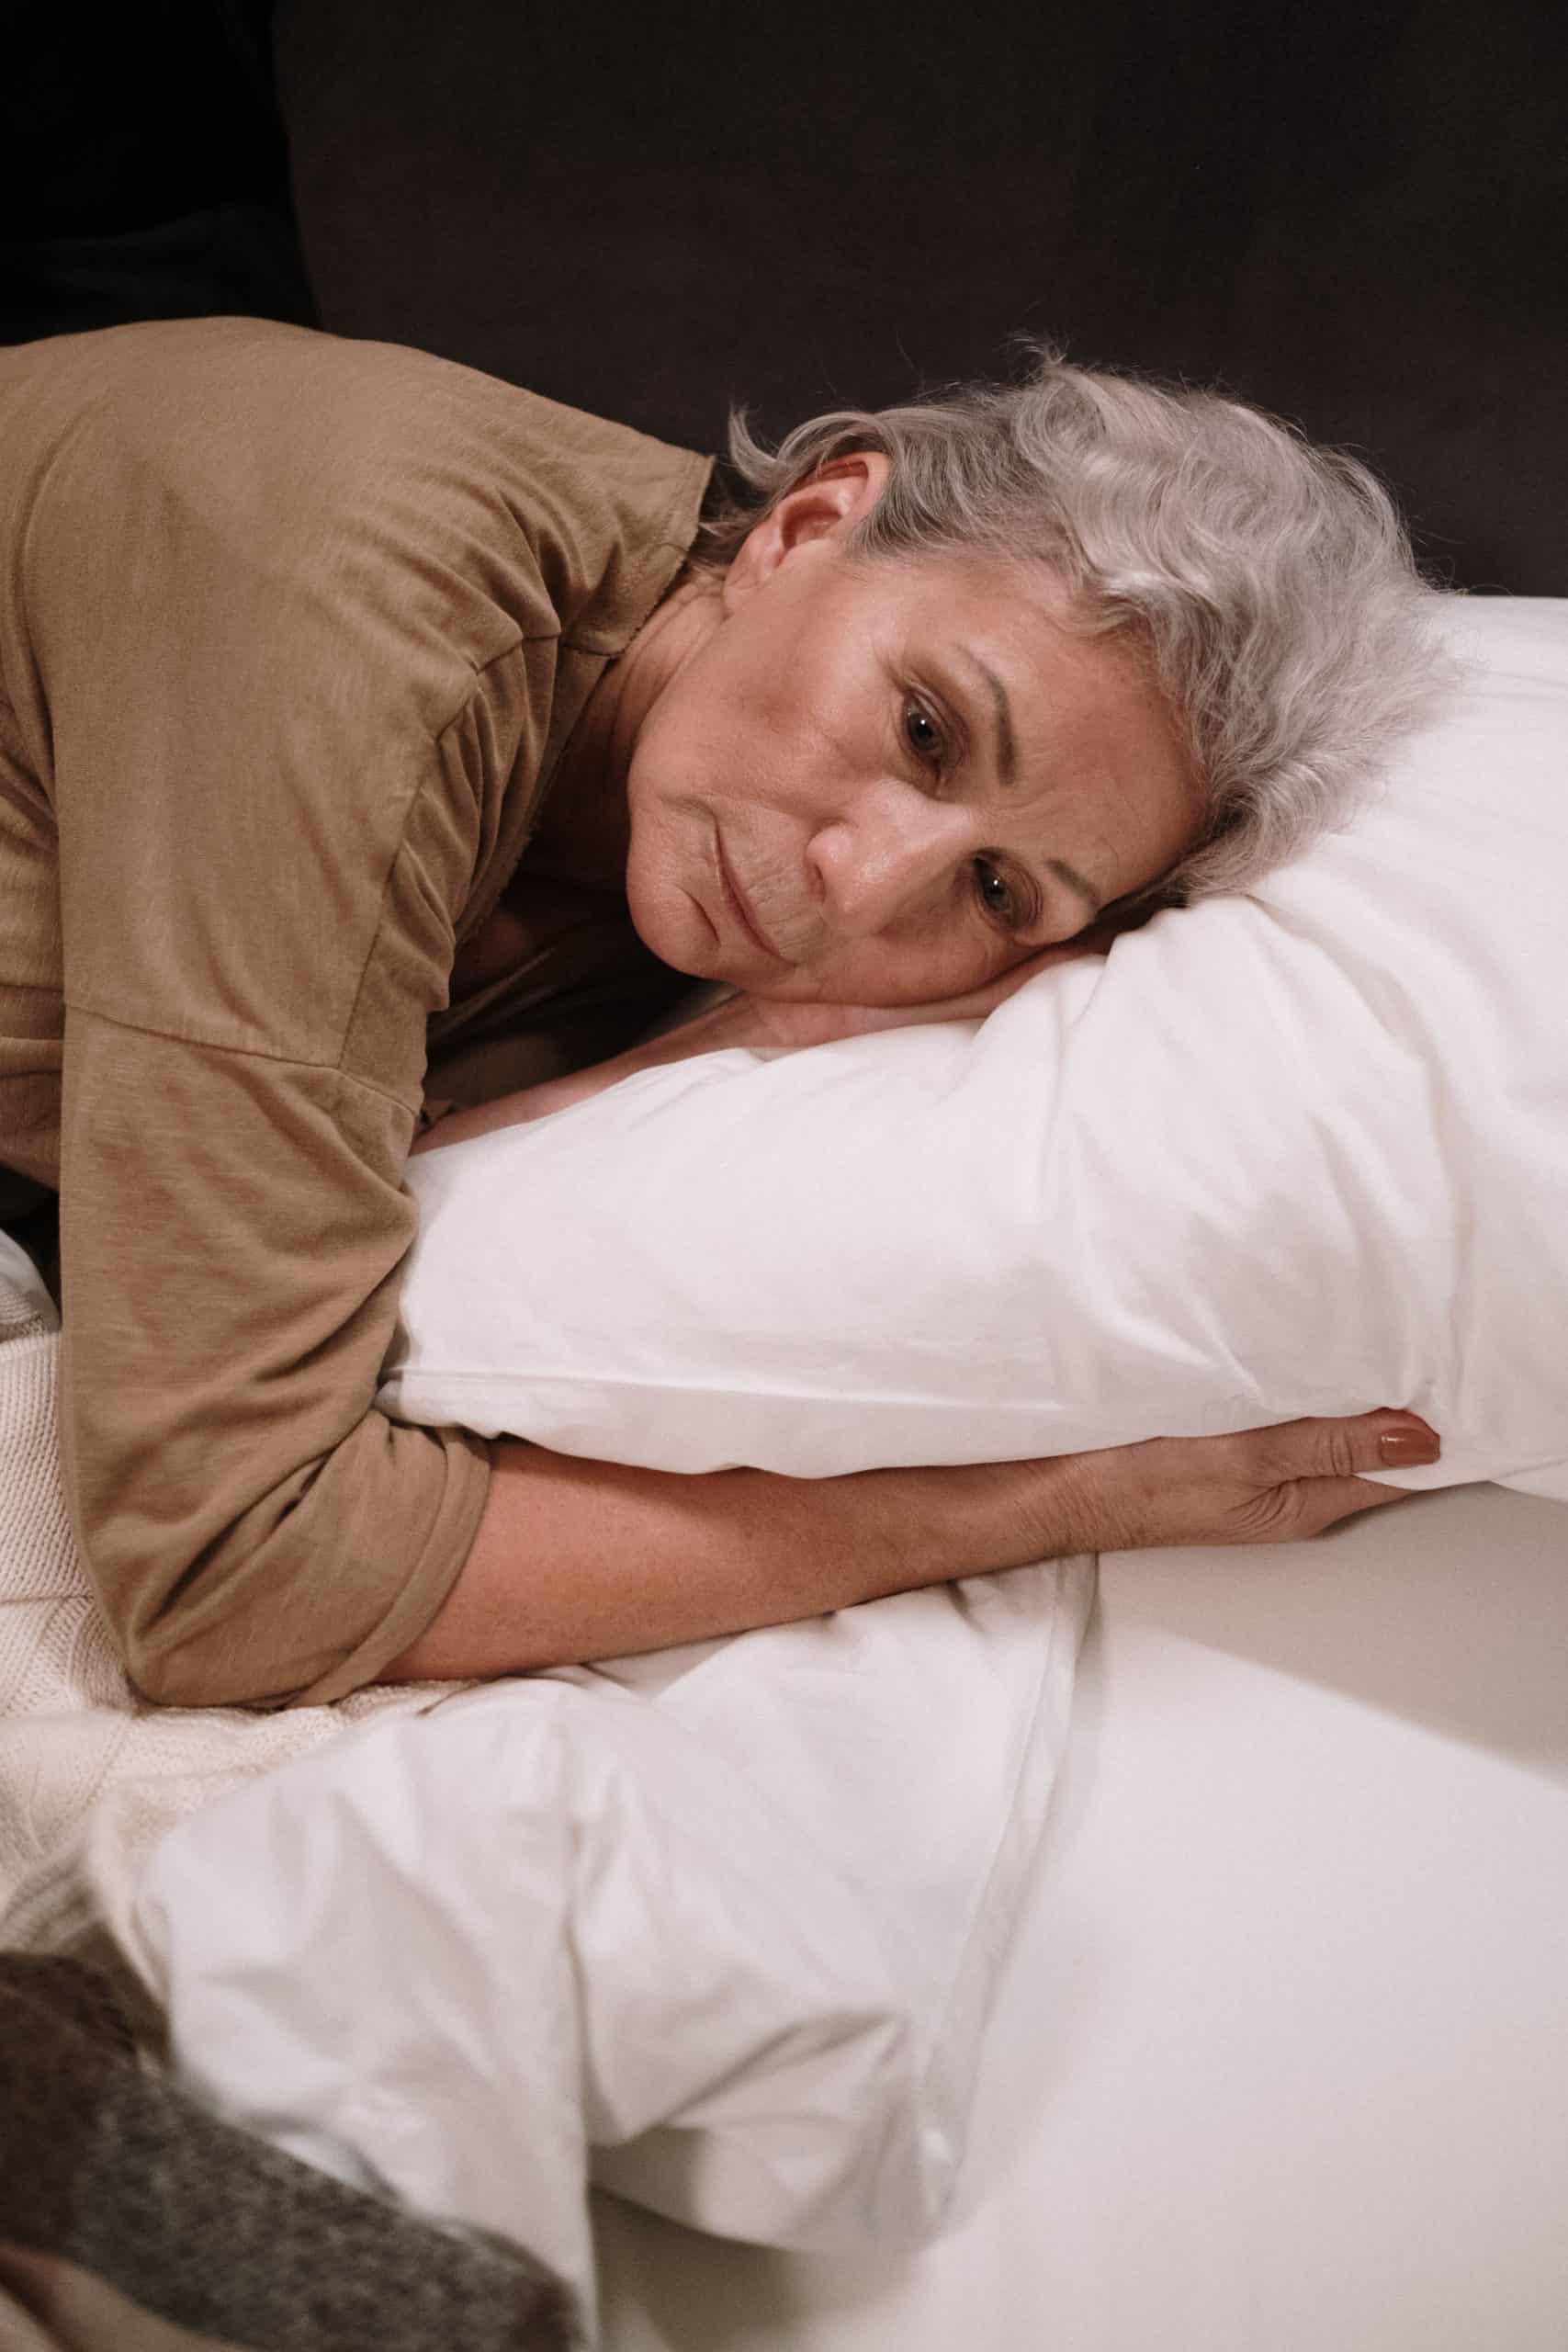 The Complications Of Poor Sleep Quality In The Elderly